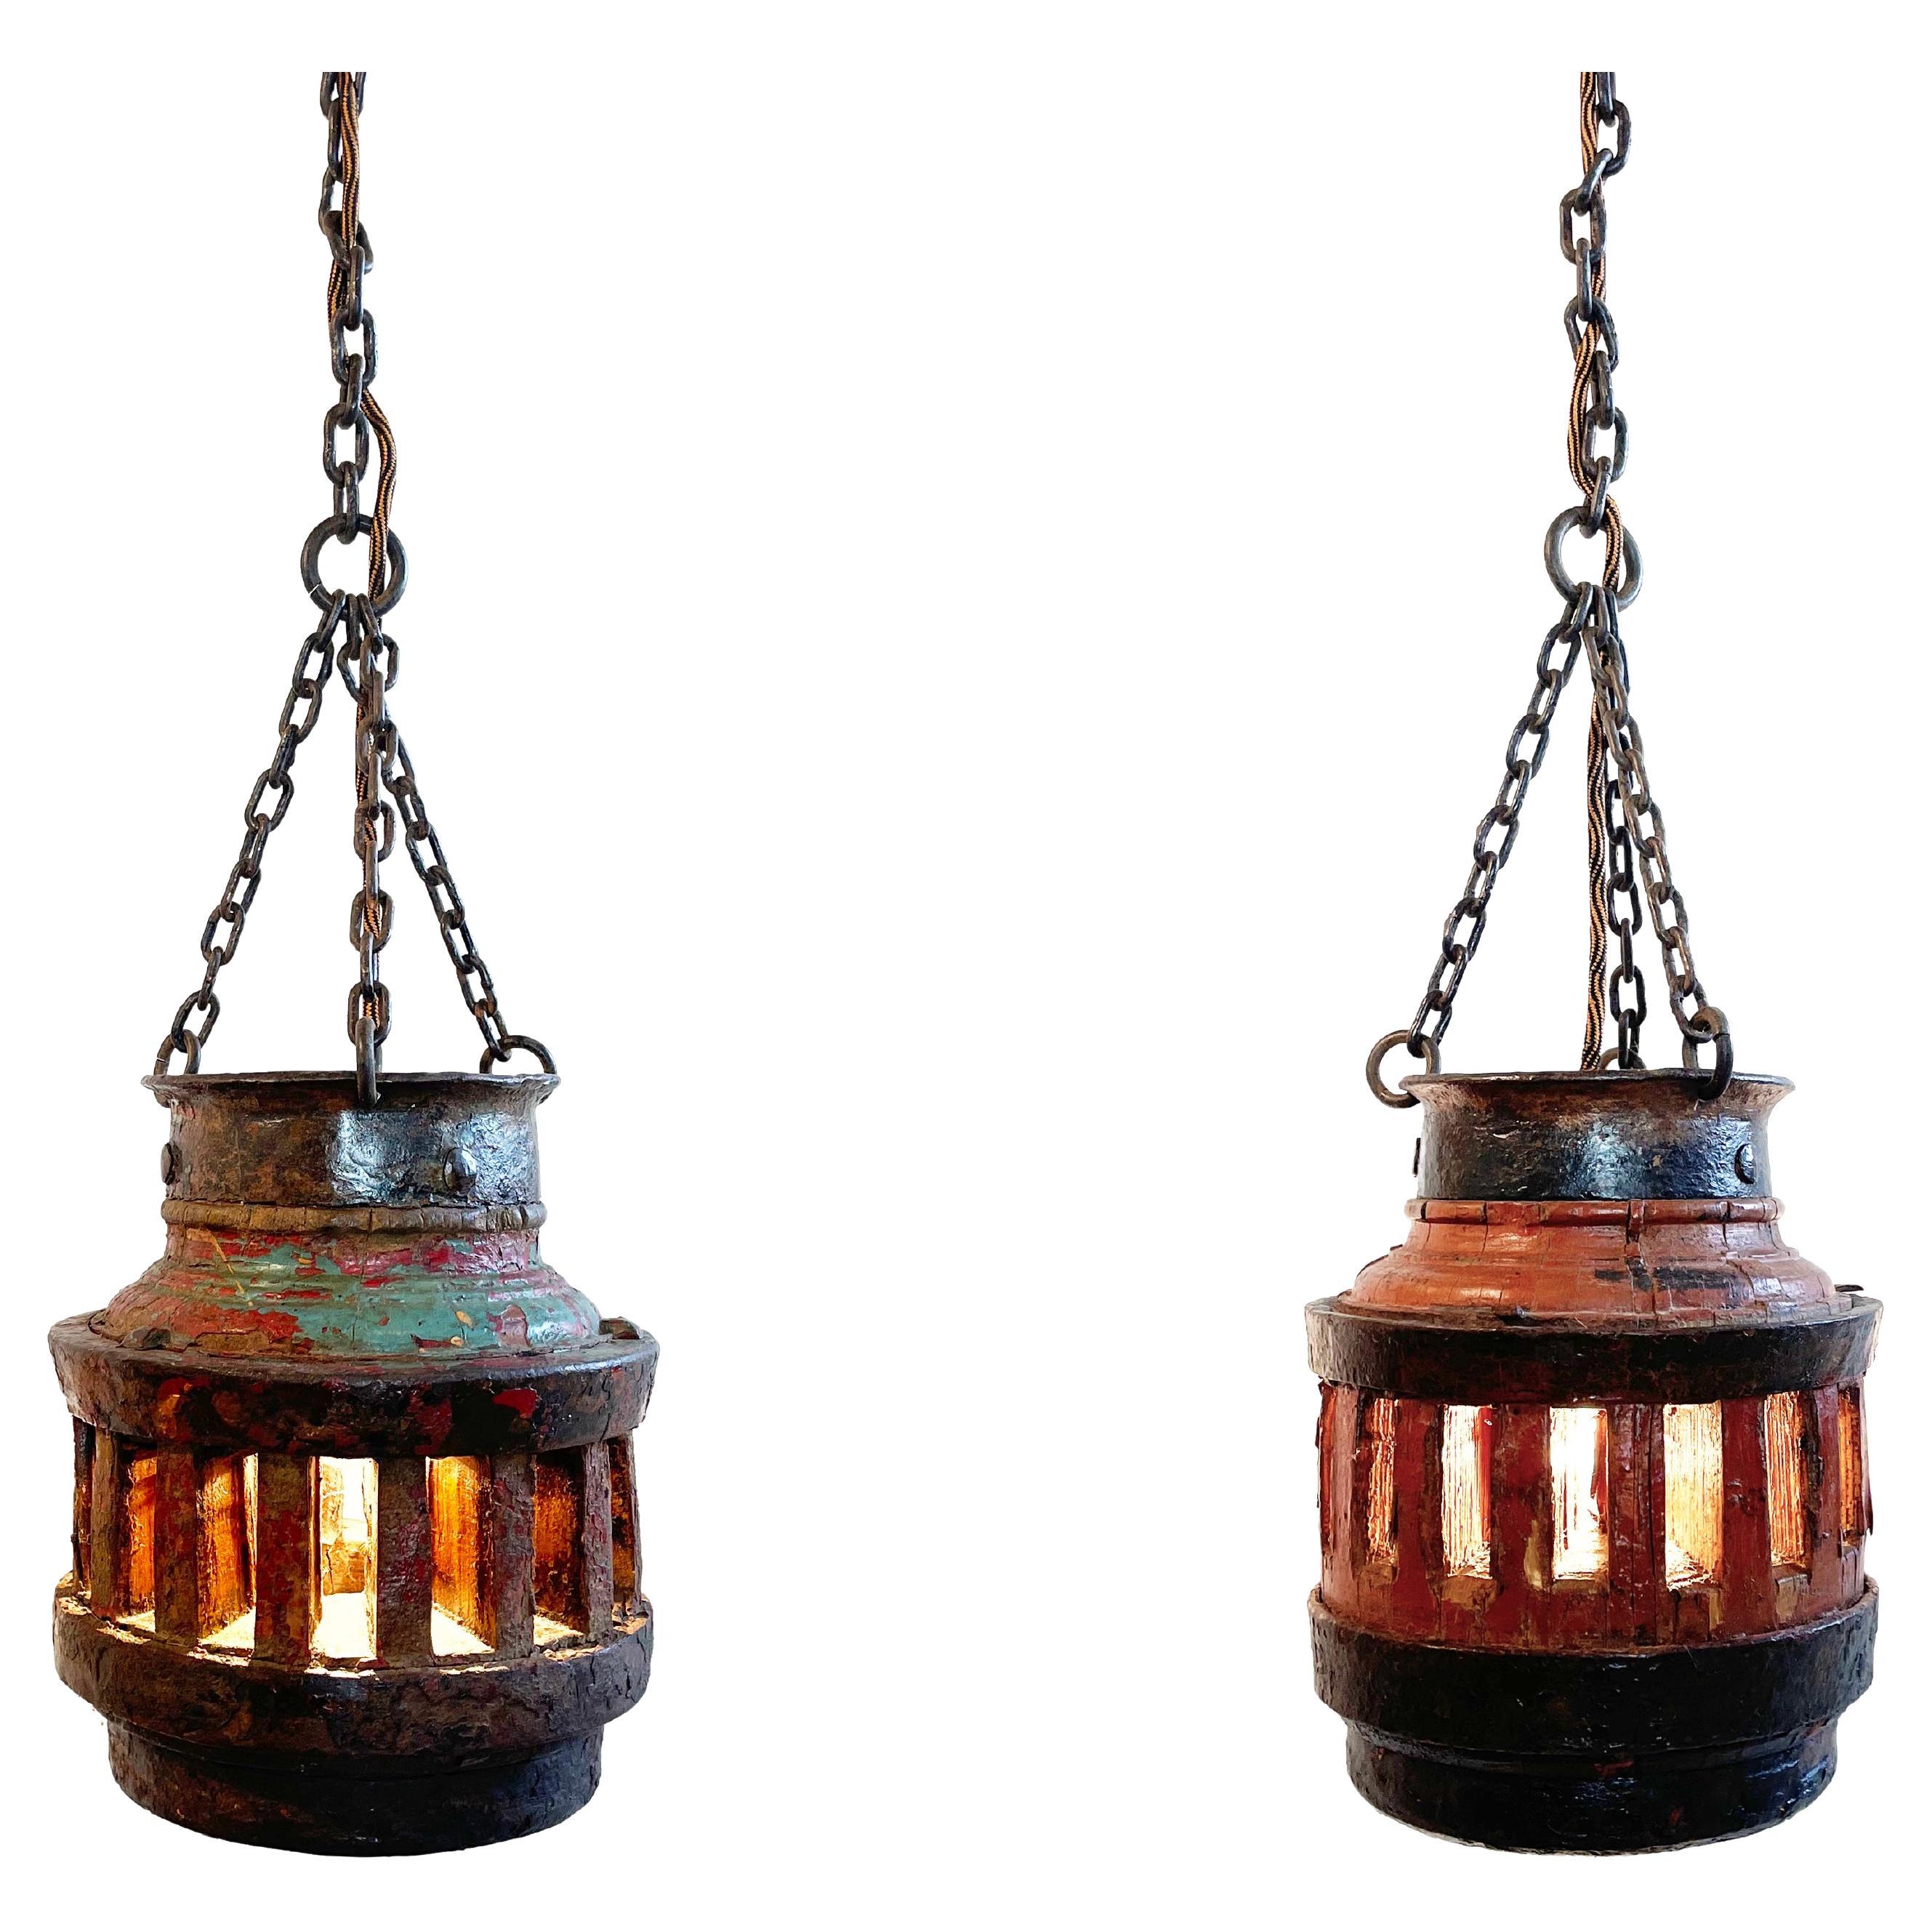 Antique Pair of Wooden Wagon Wheel Hub Pendant Lamps & Chains, Germany ca. 1850s For Sale